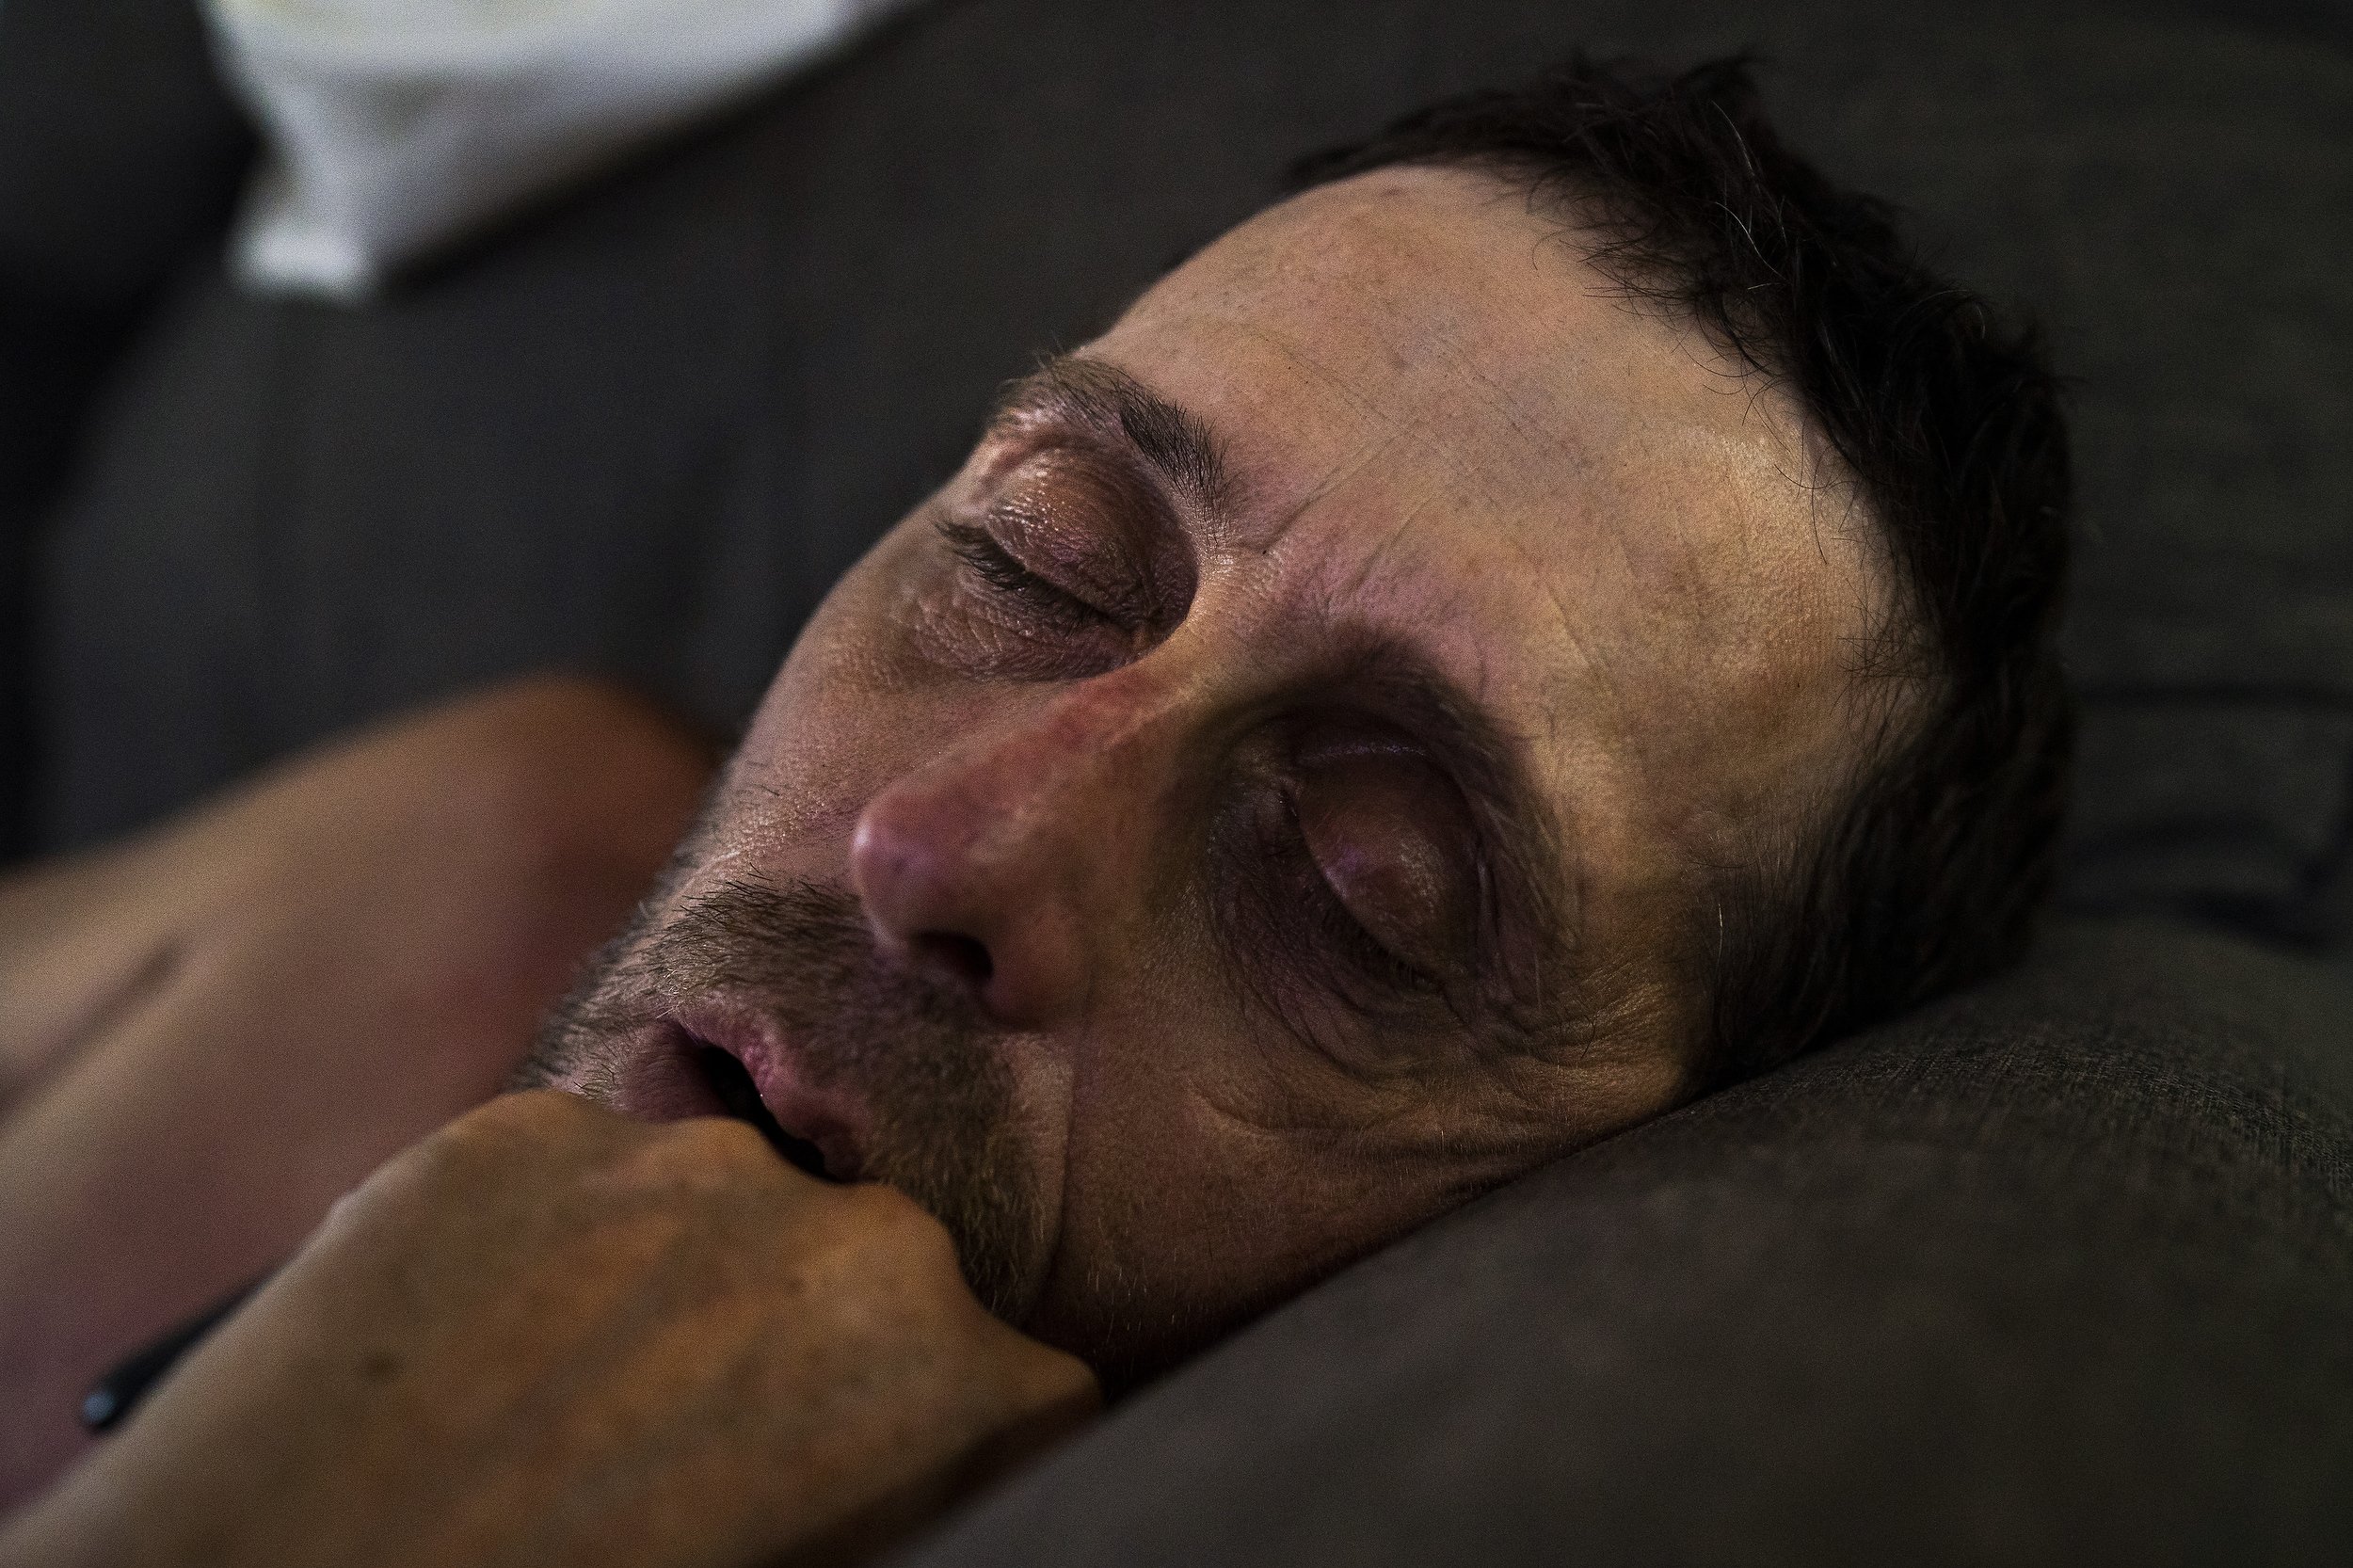  Daryel Franklin Miller, 50, lays passed out on the couch after a day of drinking. 